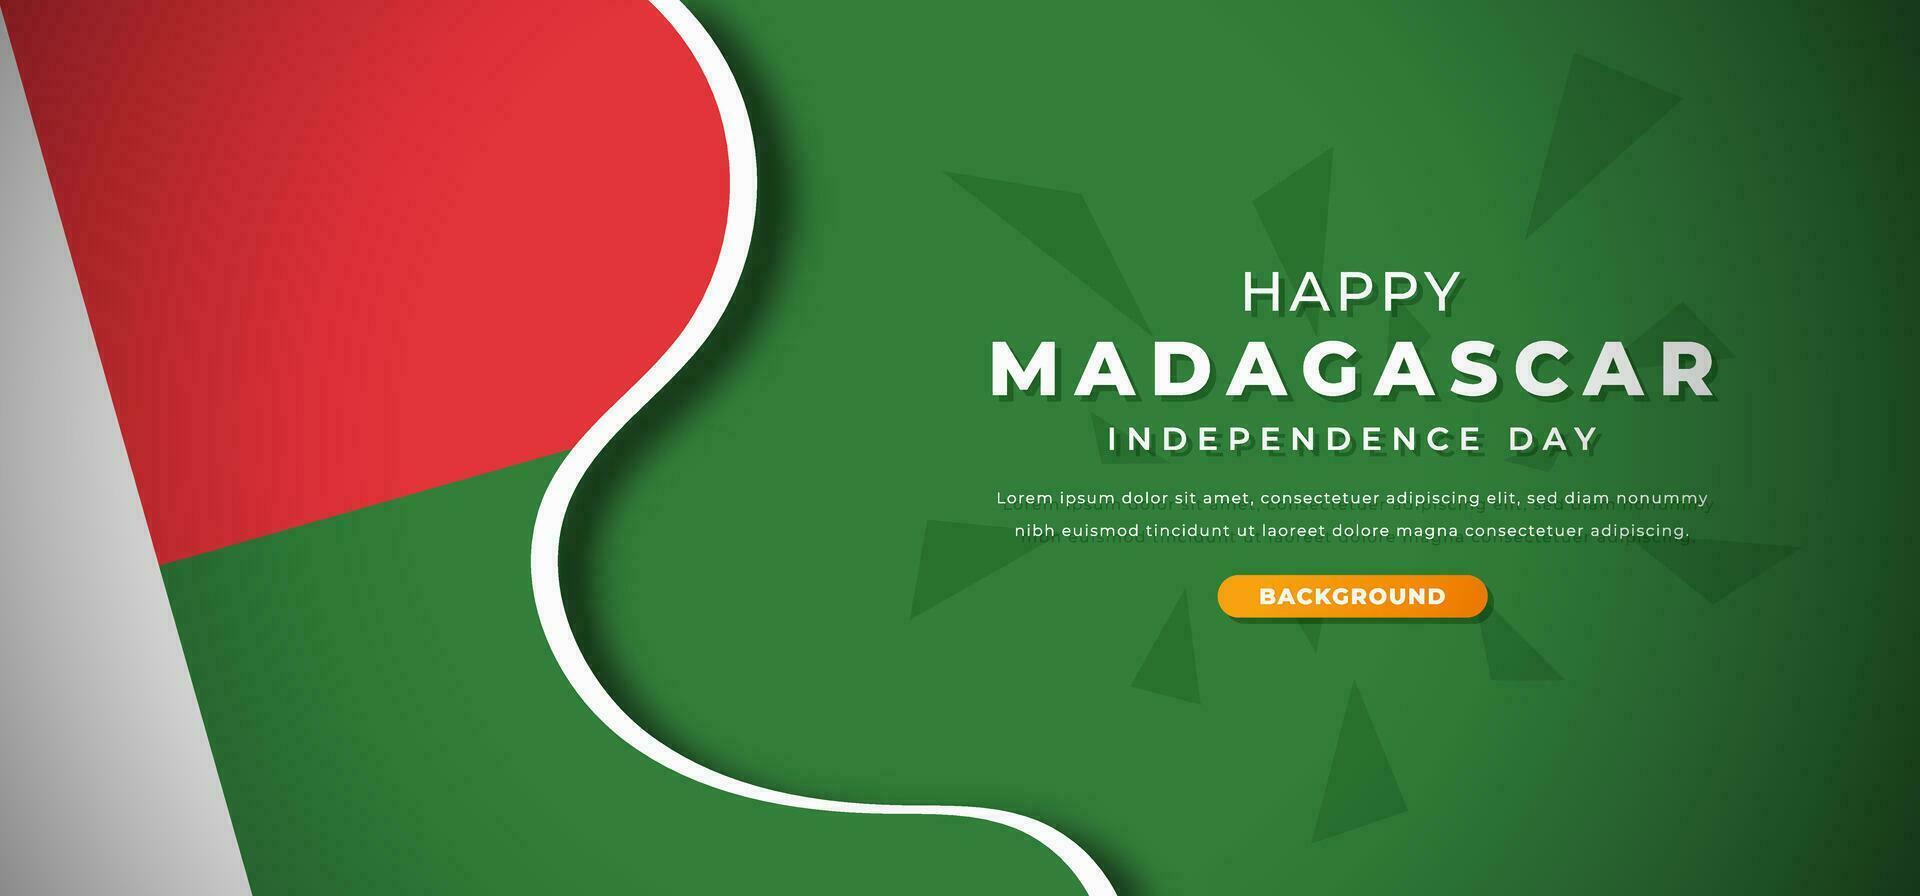 Happy Madagascar Independence Day Design Paper Cut Shapes Background Illustration for Poster, Banner, Advertising, Greeting Card vector